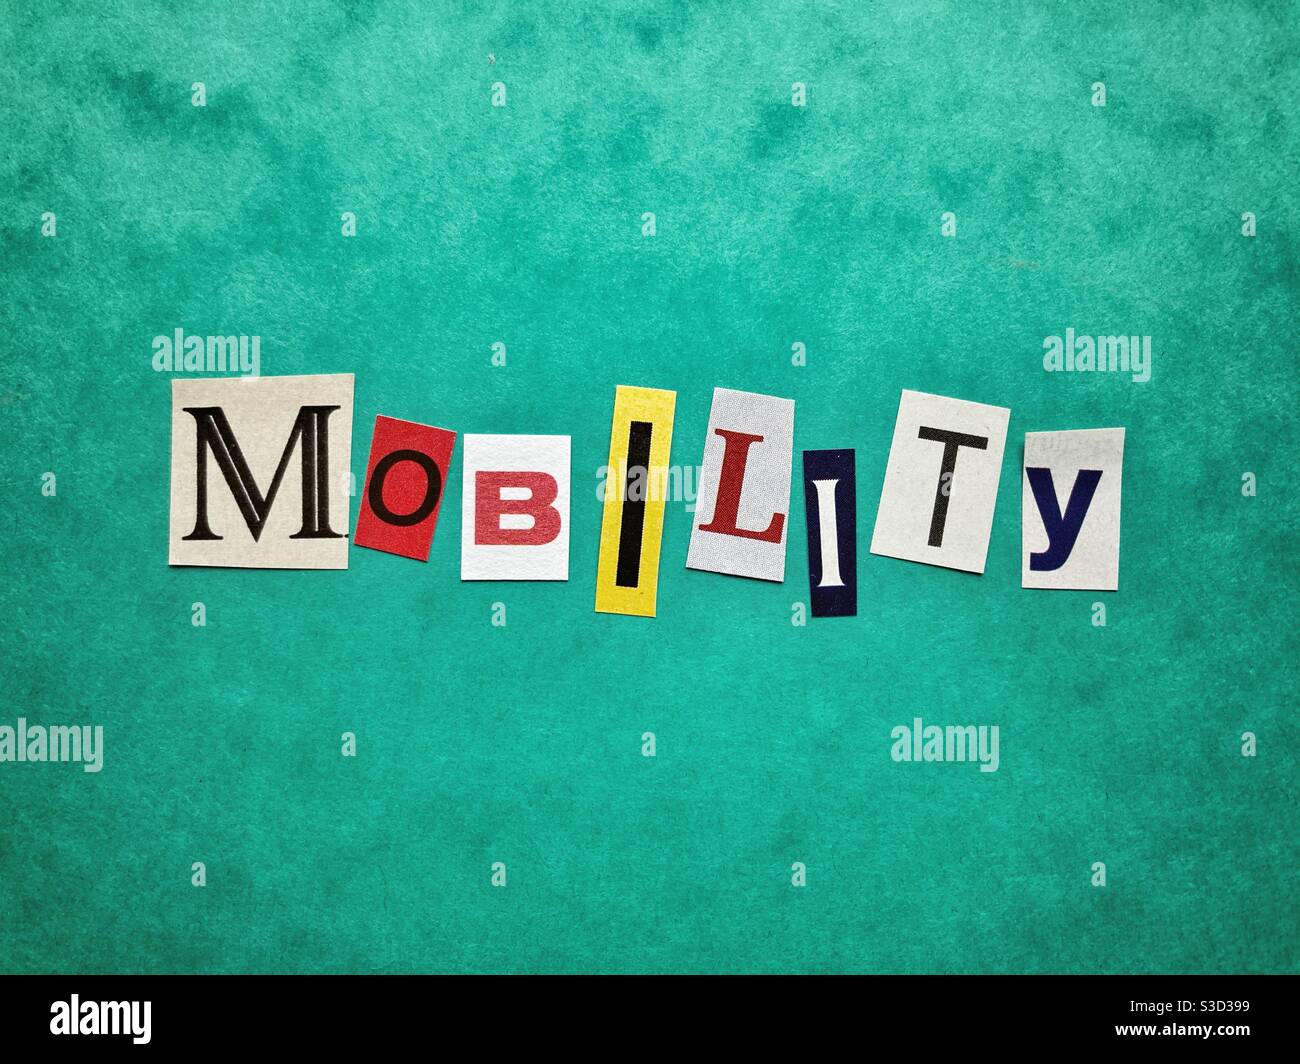 The Word Mobility as a Concept Stock Photo